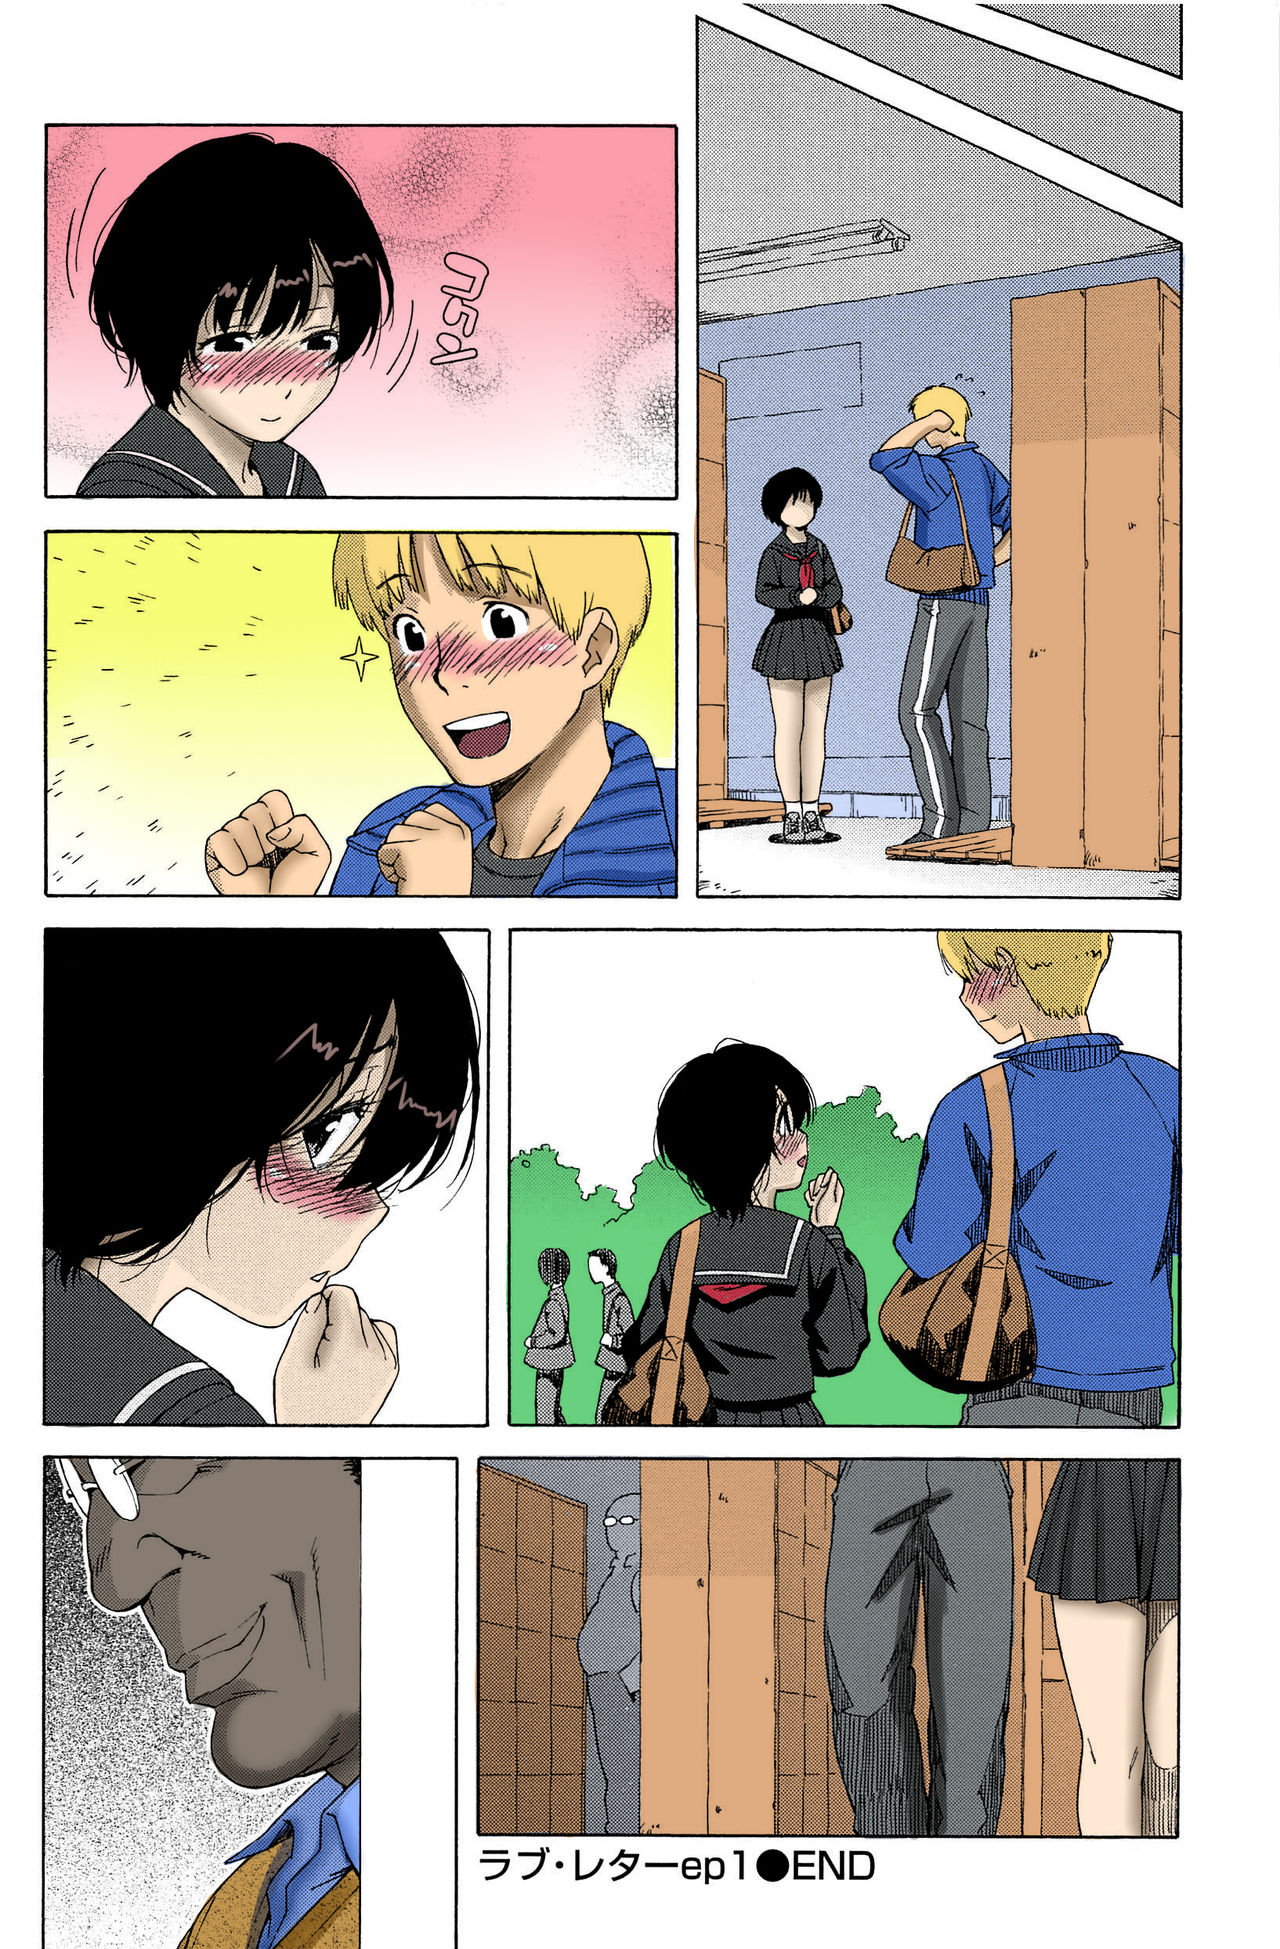 [Jingrock] Love Letter [Ongoing][English][Colorized][Erocolor] page 23 full